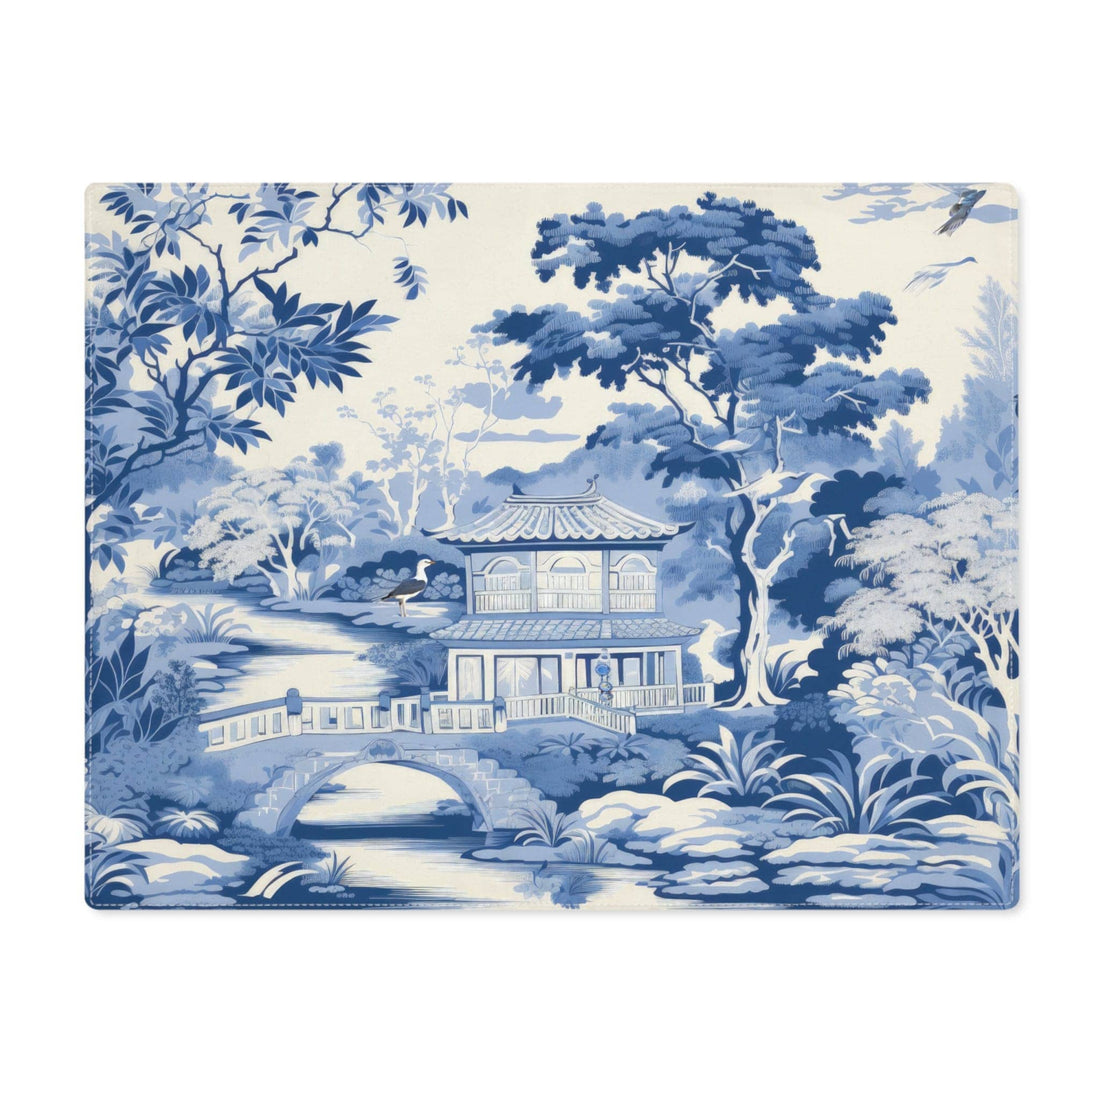 Kate McEnroe New York Chinoiserie Pagoda Floral Fabric Placemat, Country Farmhouse Table Linens, Wedding Table Decor, Grandmillenial Kitchen Decor - 11998823Placemats26186172390539960041